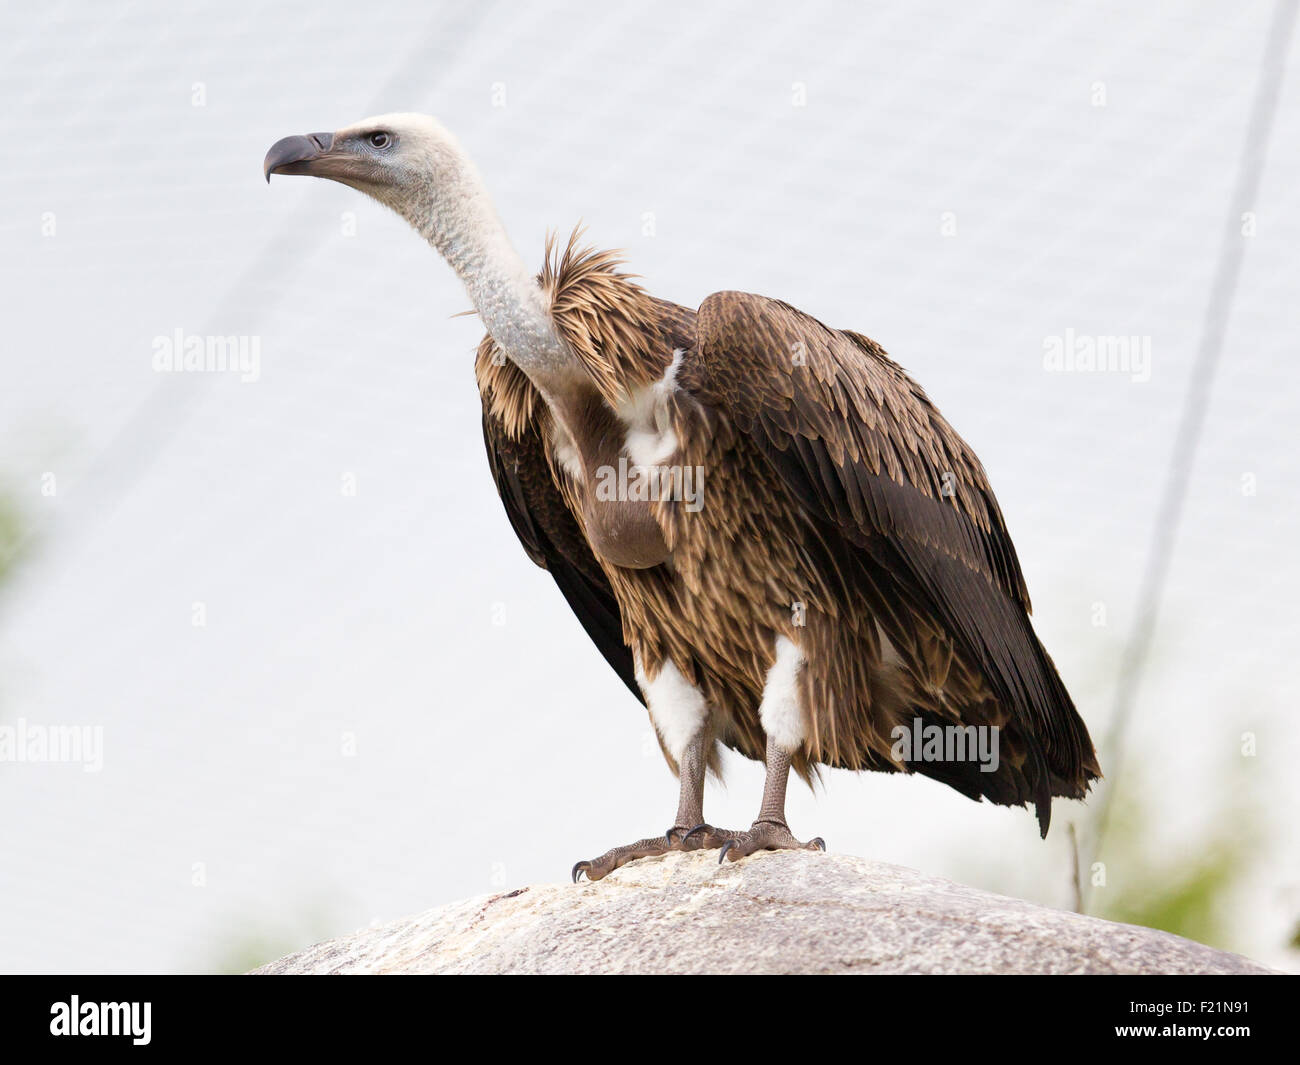 Adult condor close up on an light background Stock Photo